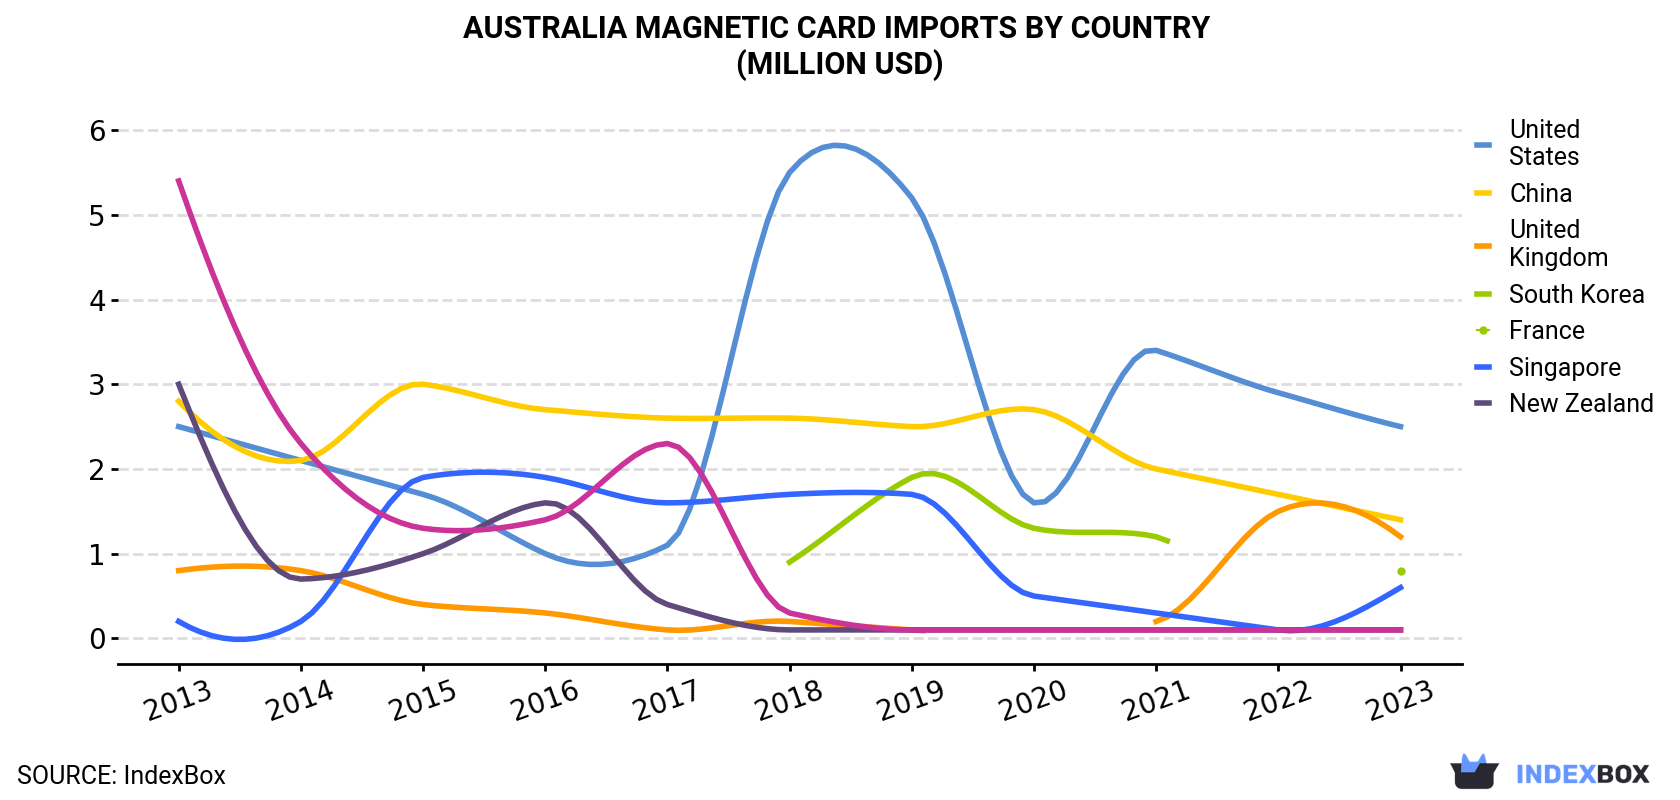 Australia Magnetic Card Imports By Country (Million USD)